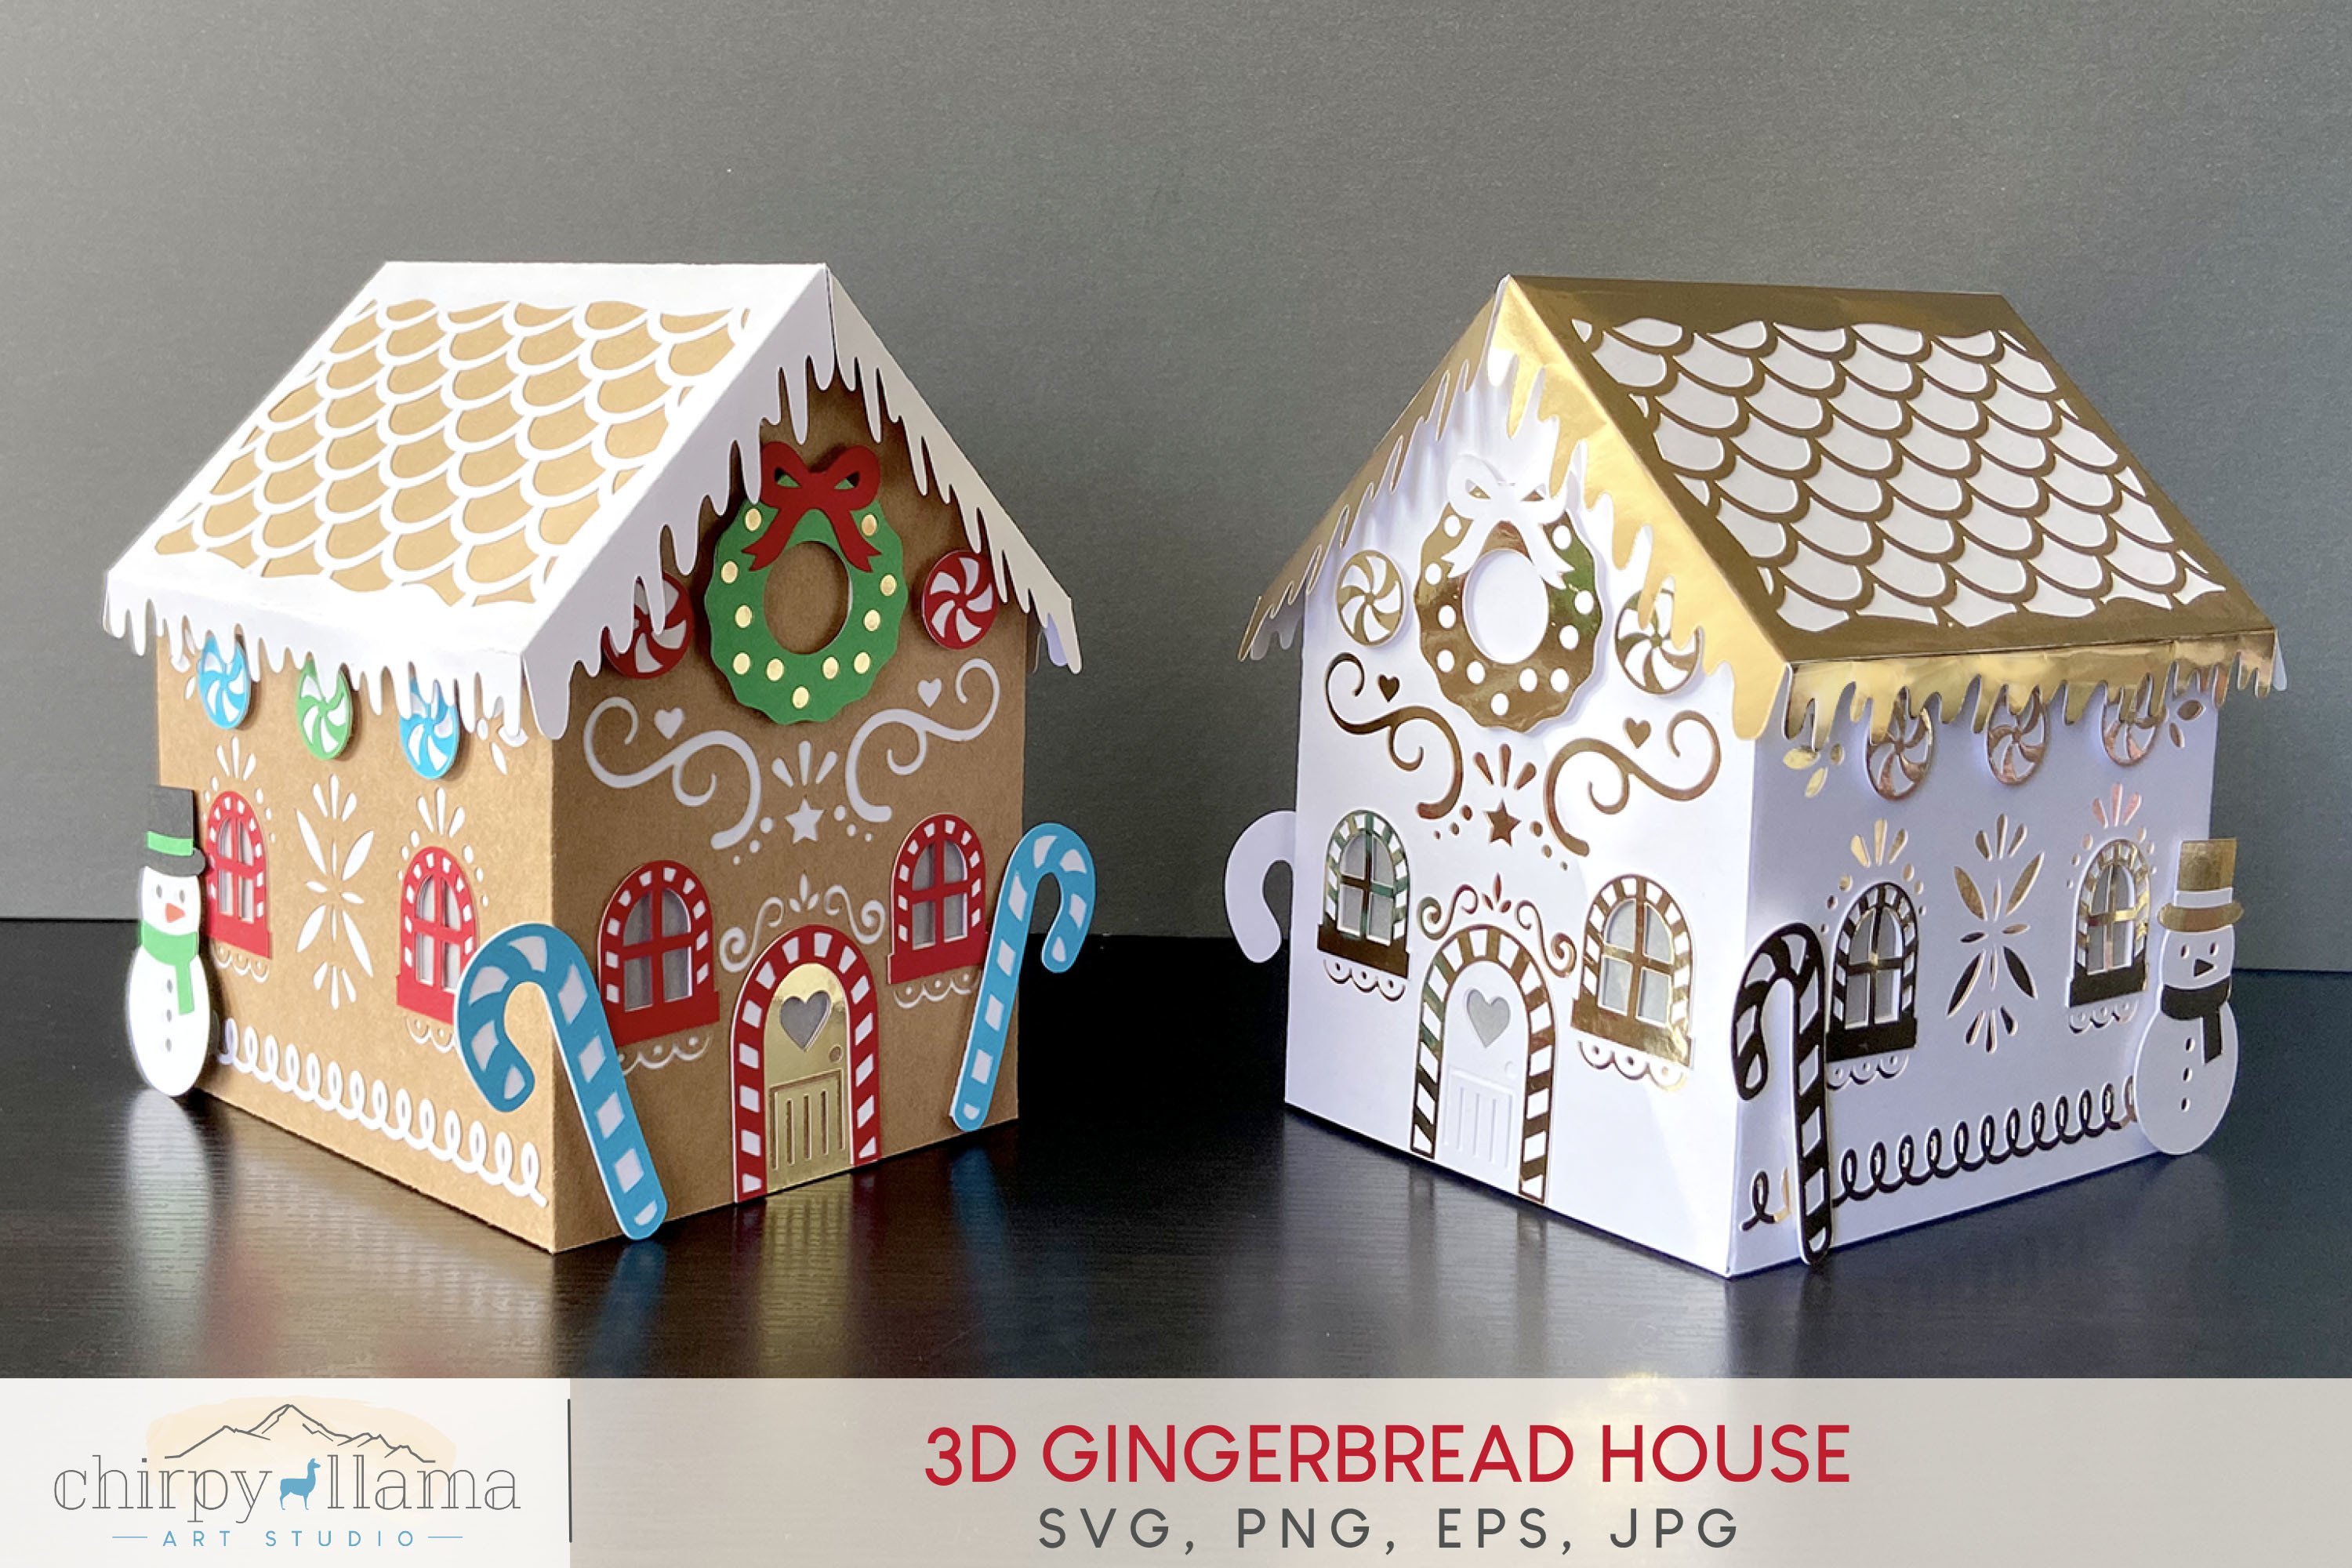 3D Gingerbread House SVG File Graphic by chirpyllama · Creative Fabrica